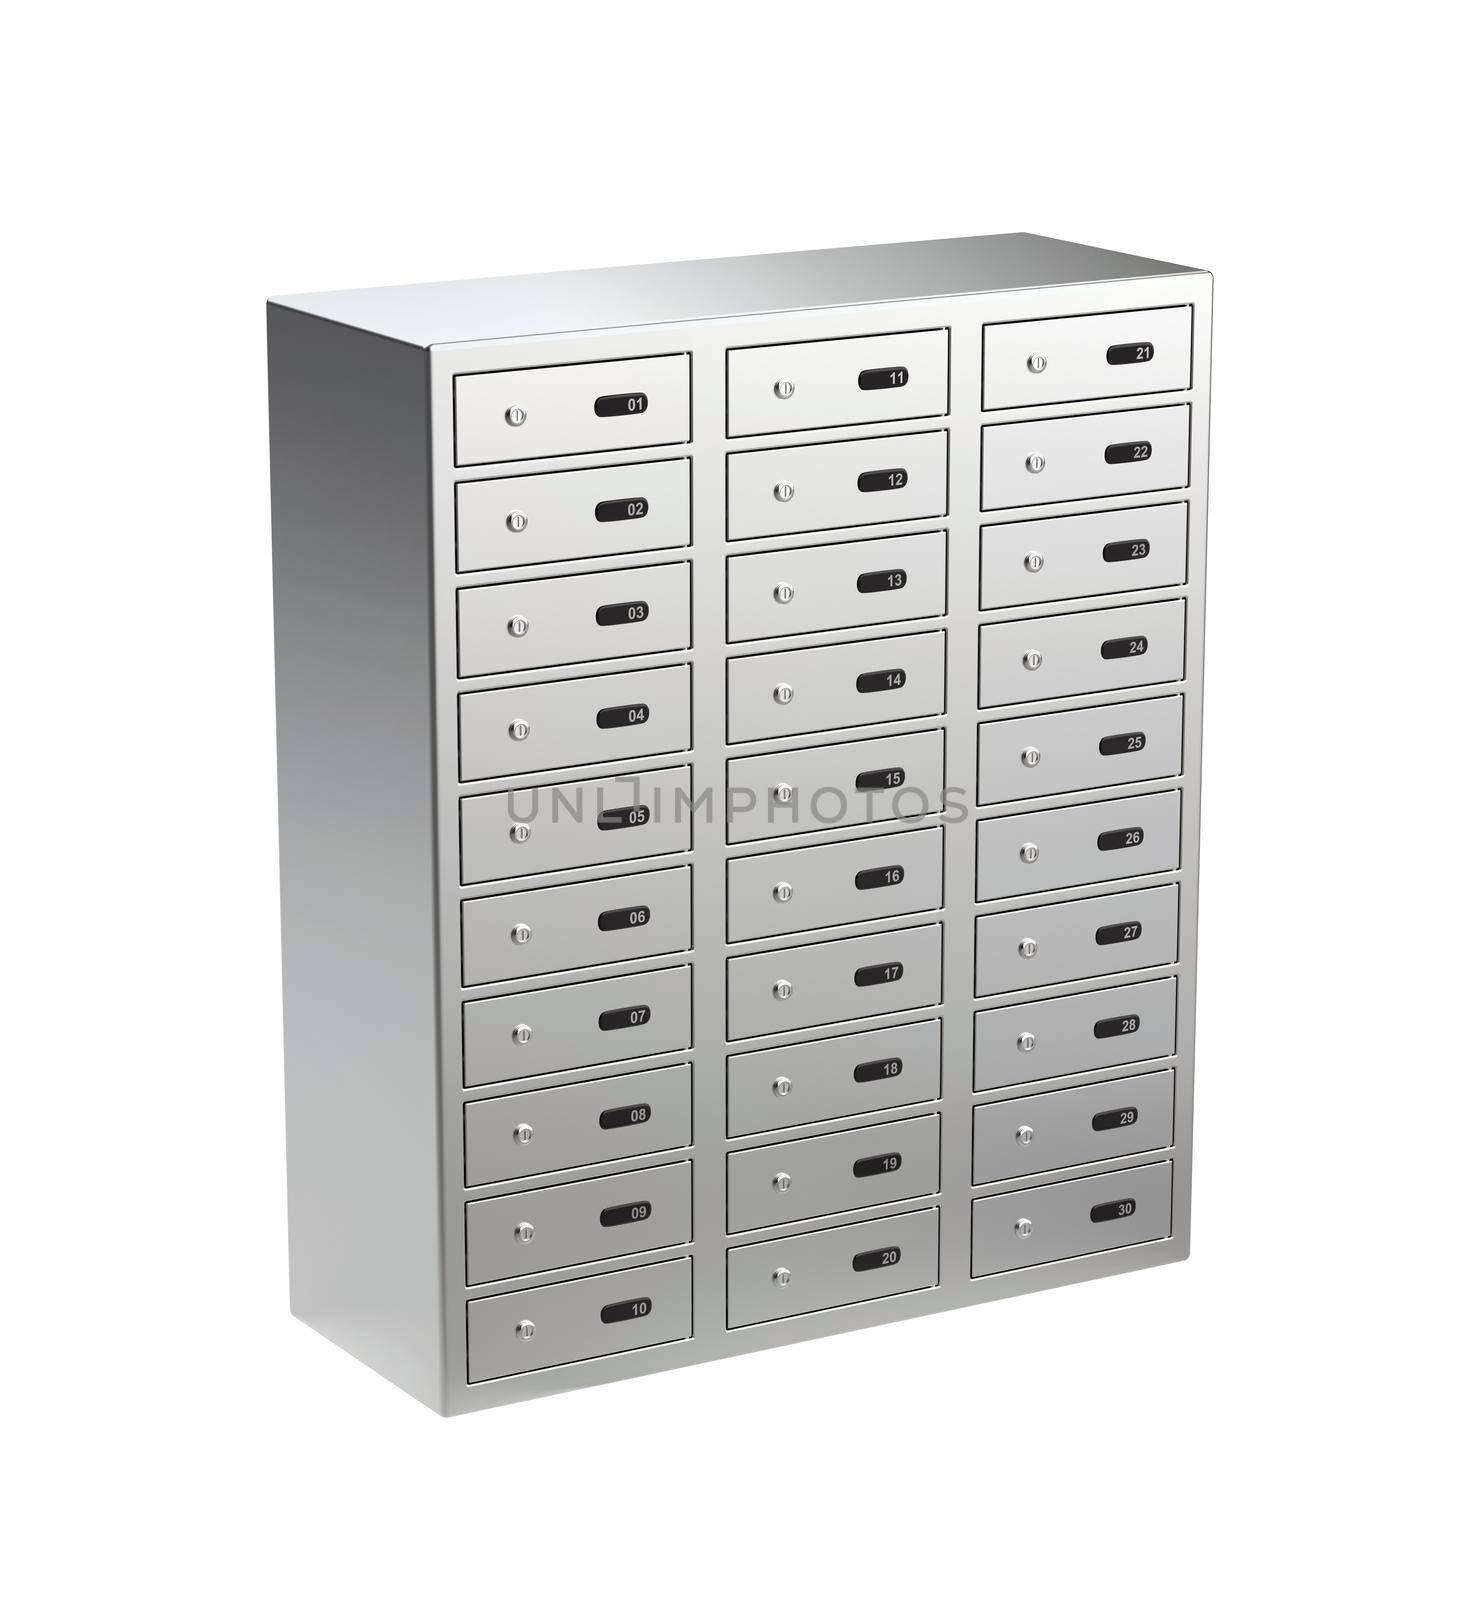 Bank safety deposit boxes by magraphics